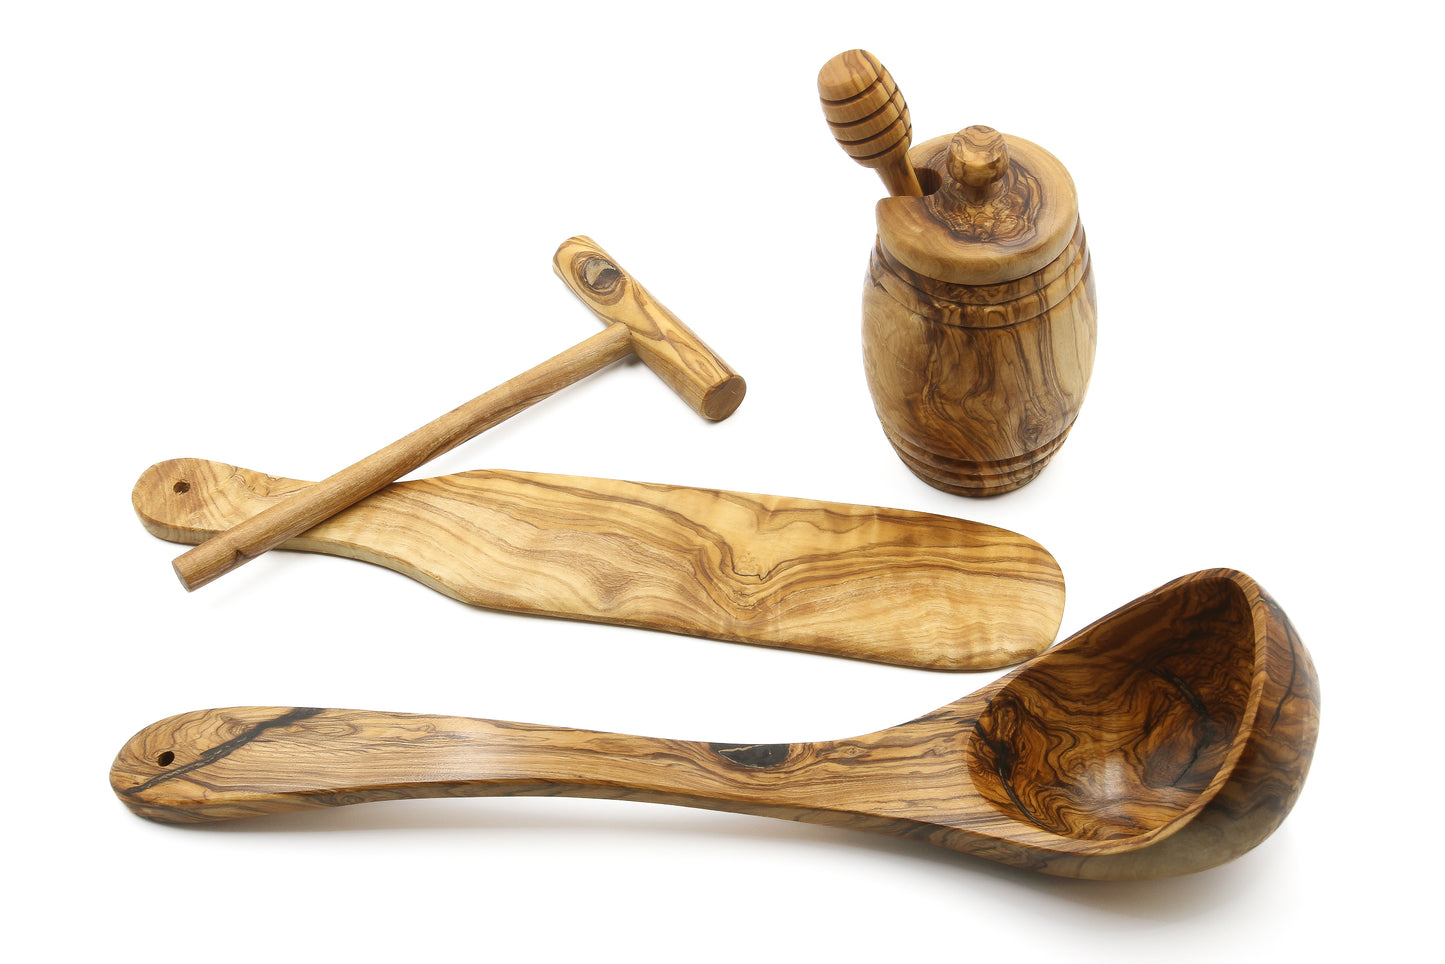 Crafted from olive wood, the Master set for crepe and pancake lovers